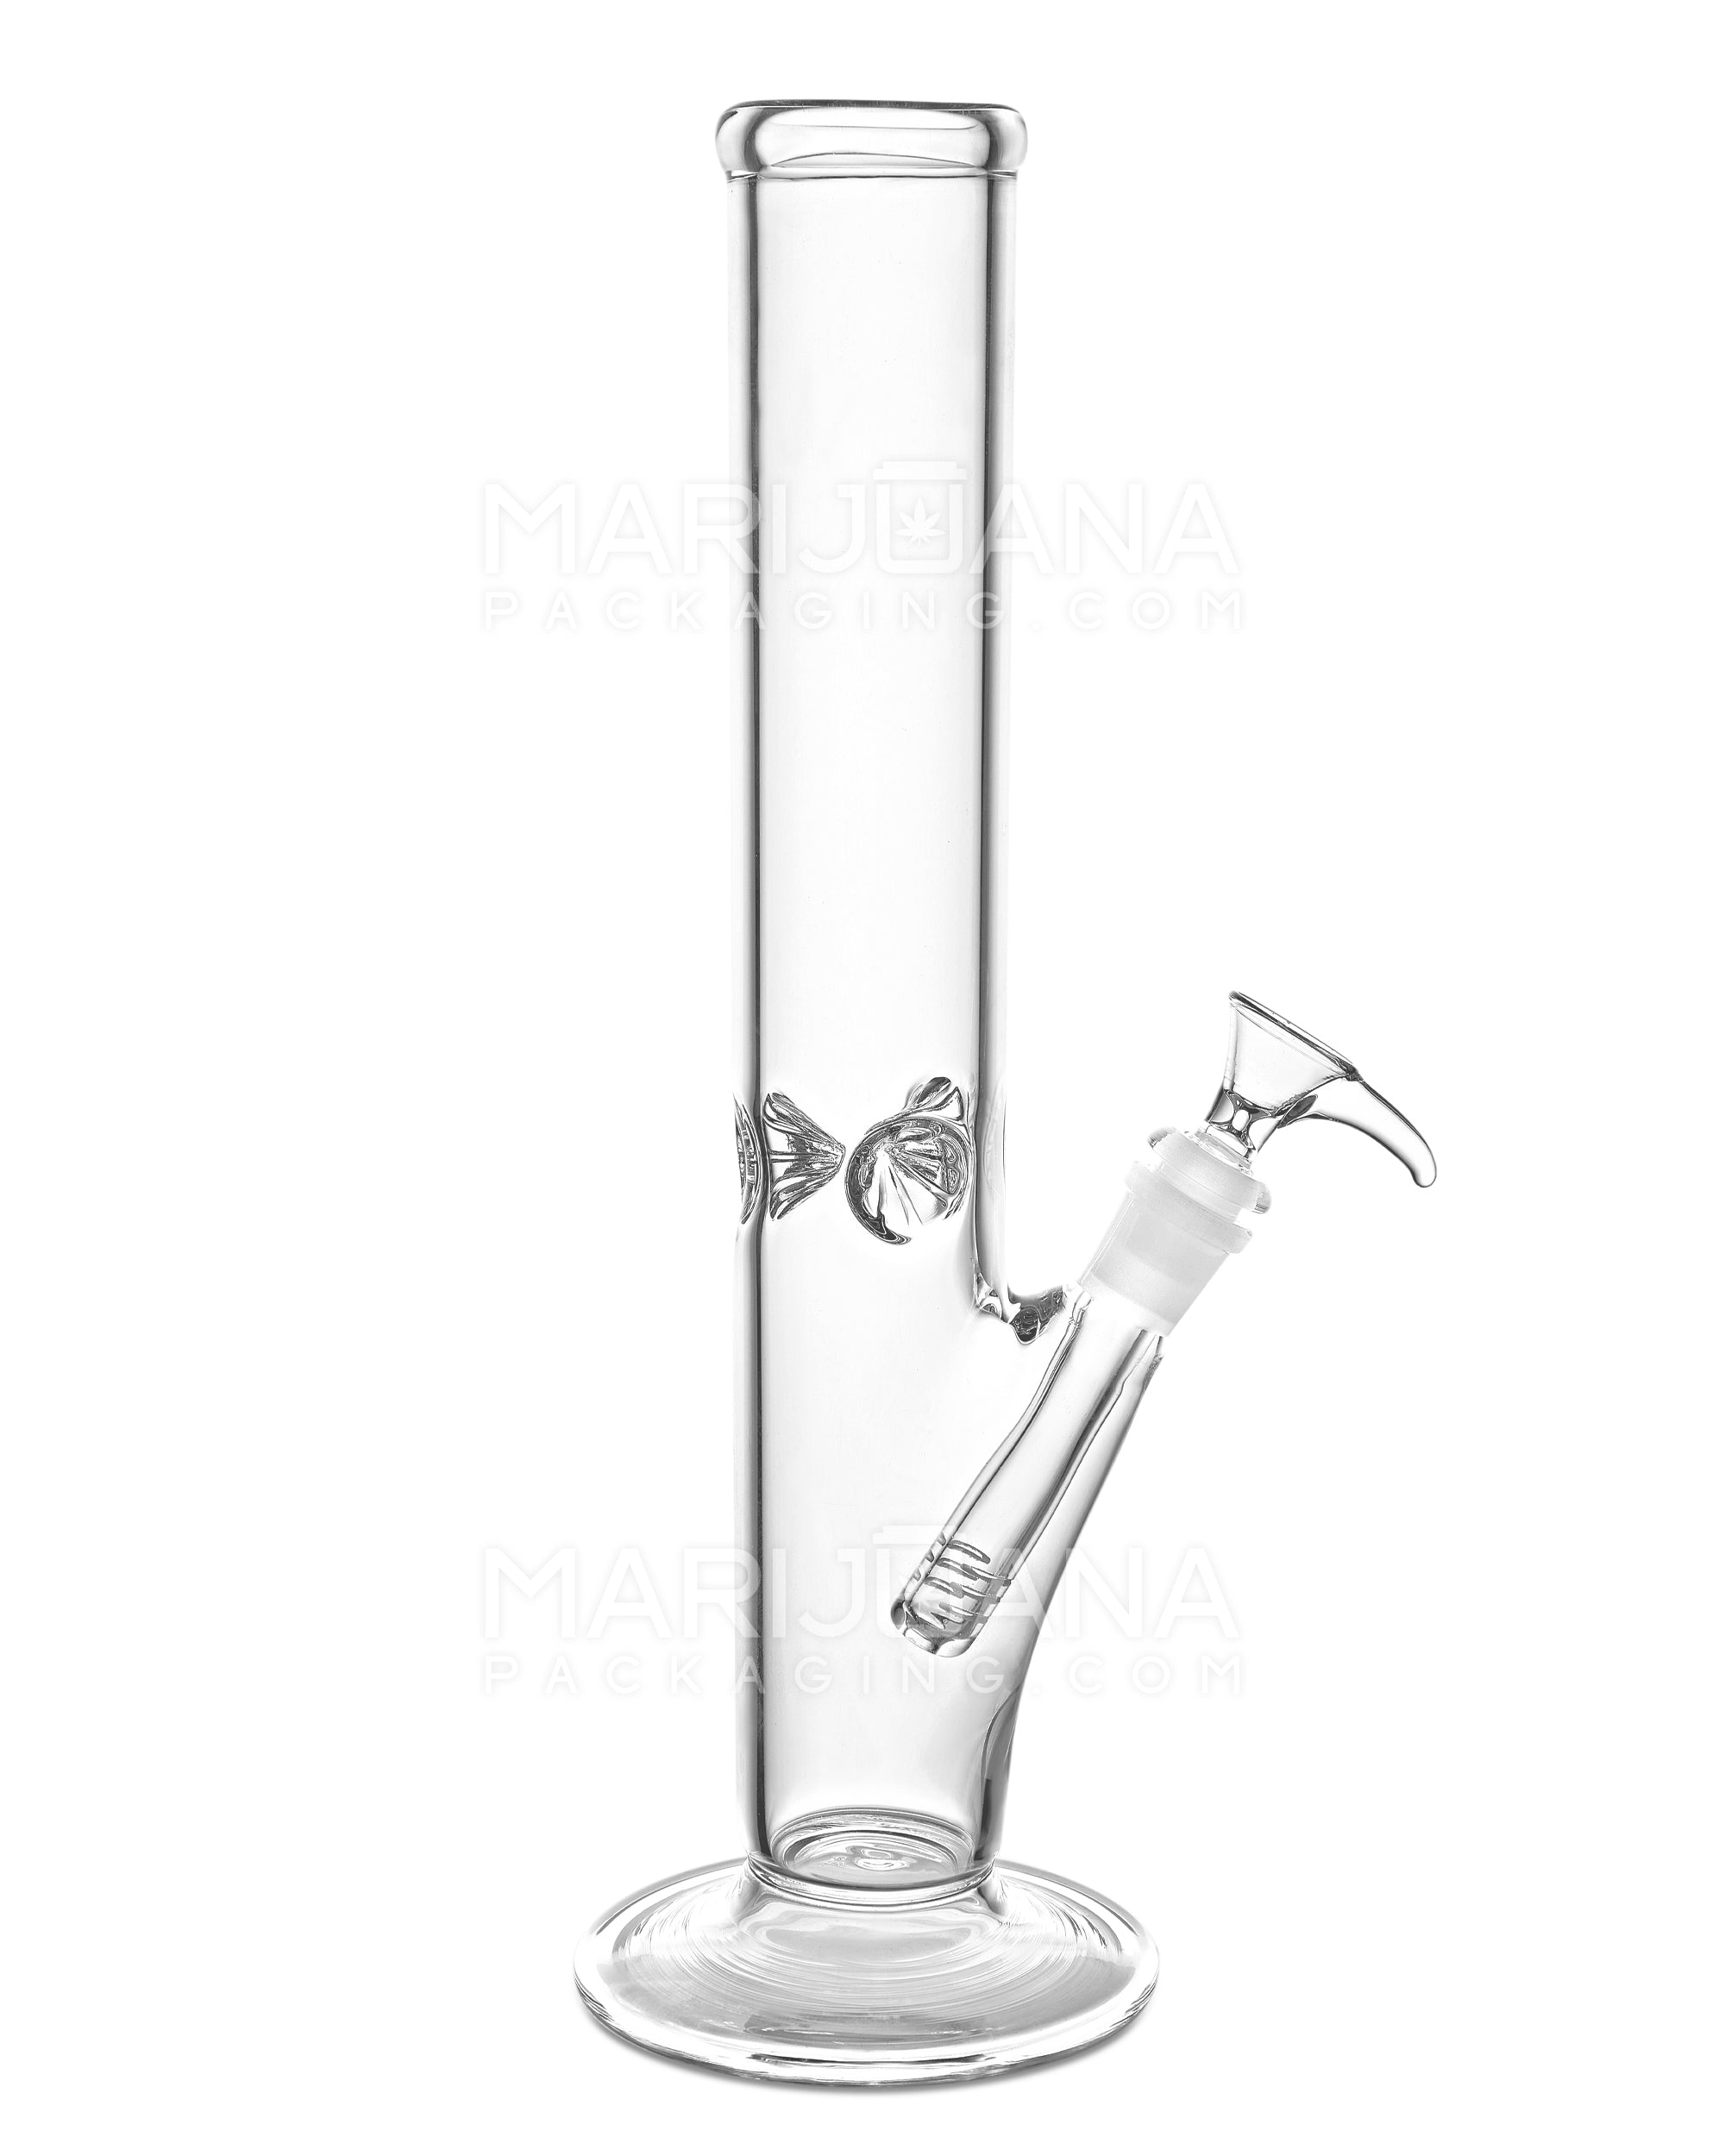 USA Glass | Straight Glass Water Pipe w/ Ice Catcher | 12in Tall - 18mm Bowl - Clear - 1